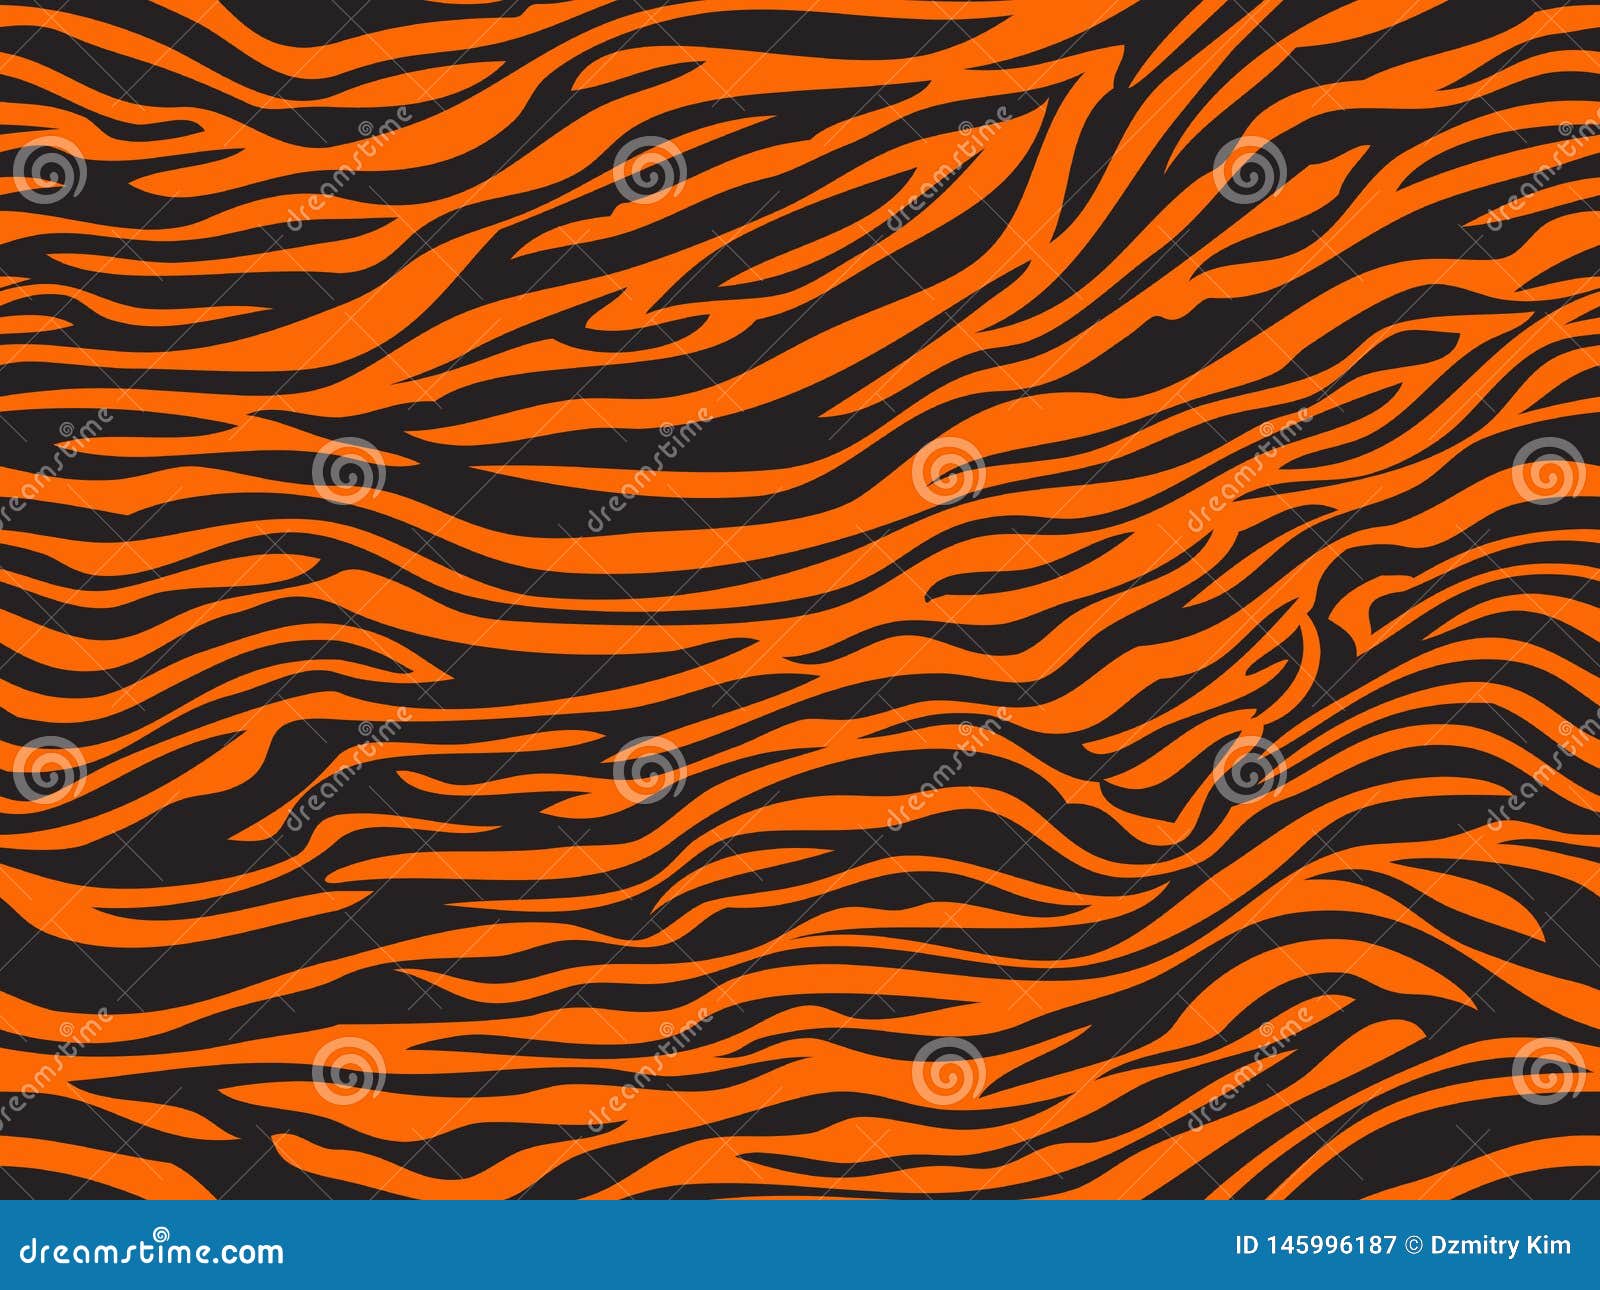  of the tiger skin exture pattern seamless repeating orange black